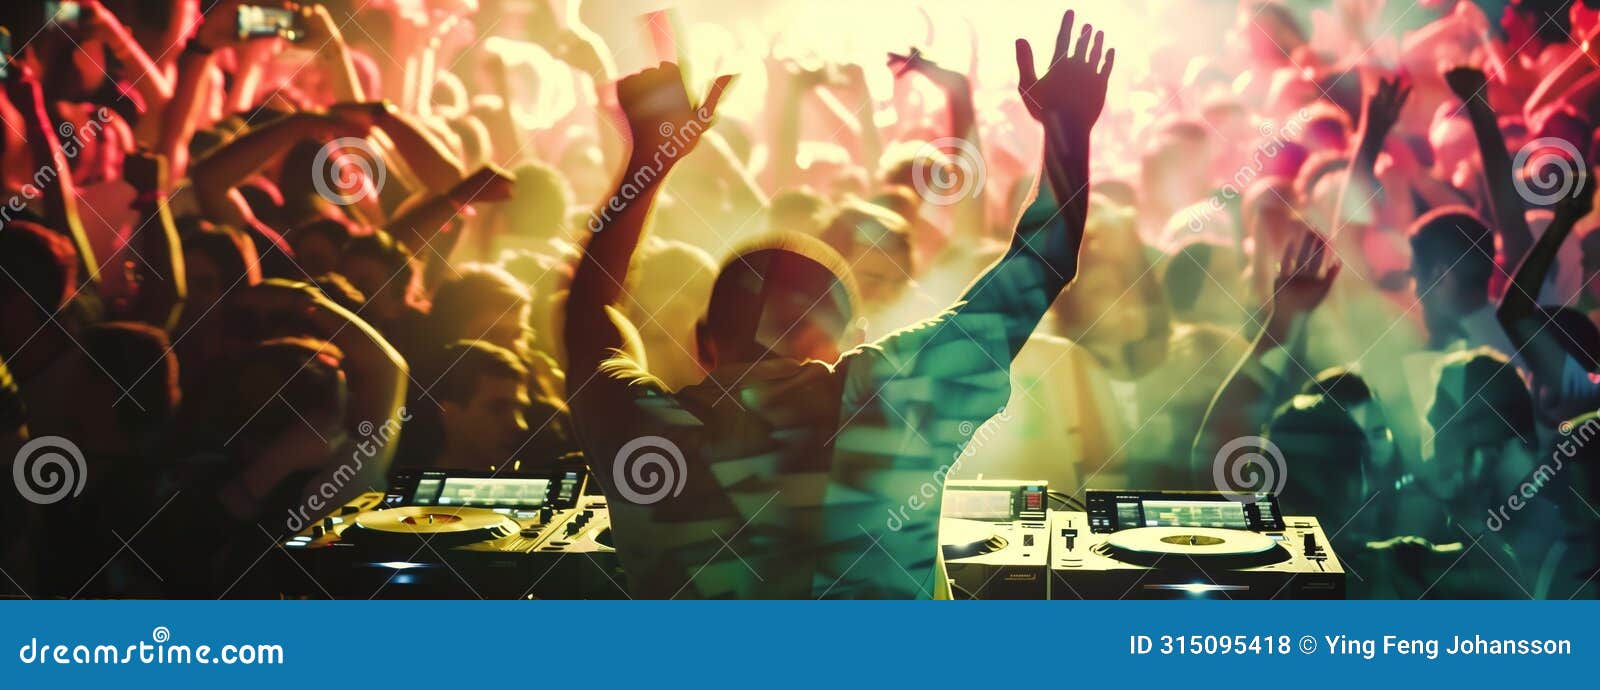 a dj commands the stage, surrounded by an ecstatic sea of dancing fans. double exposure